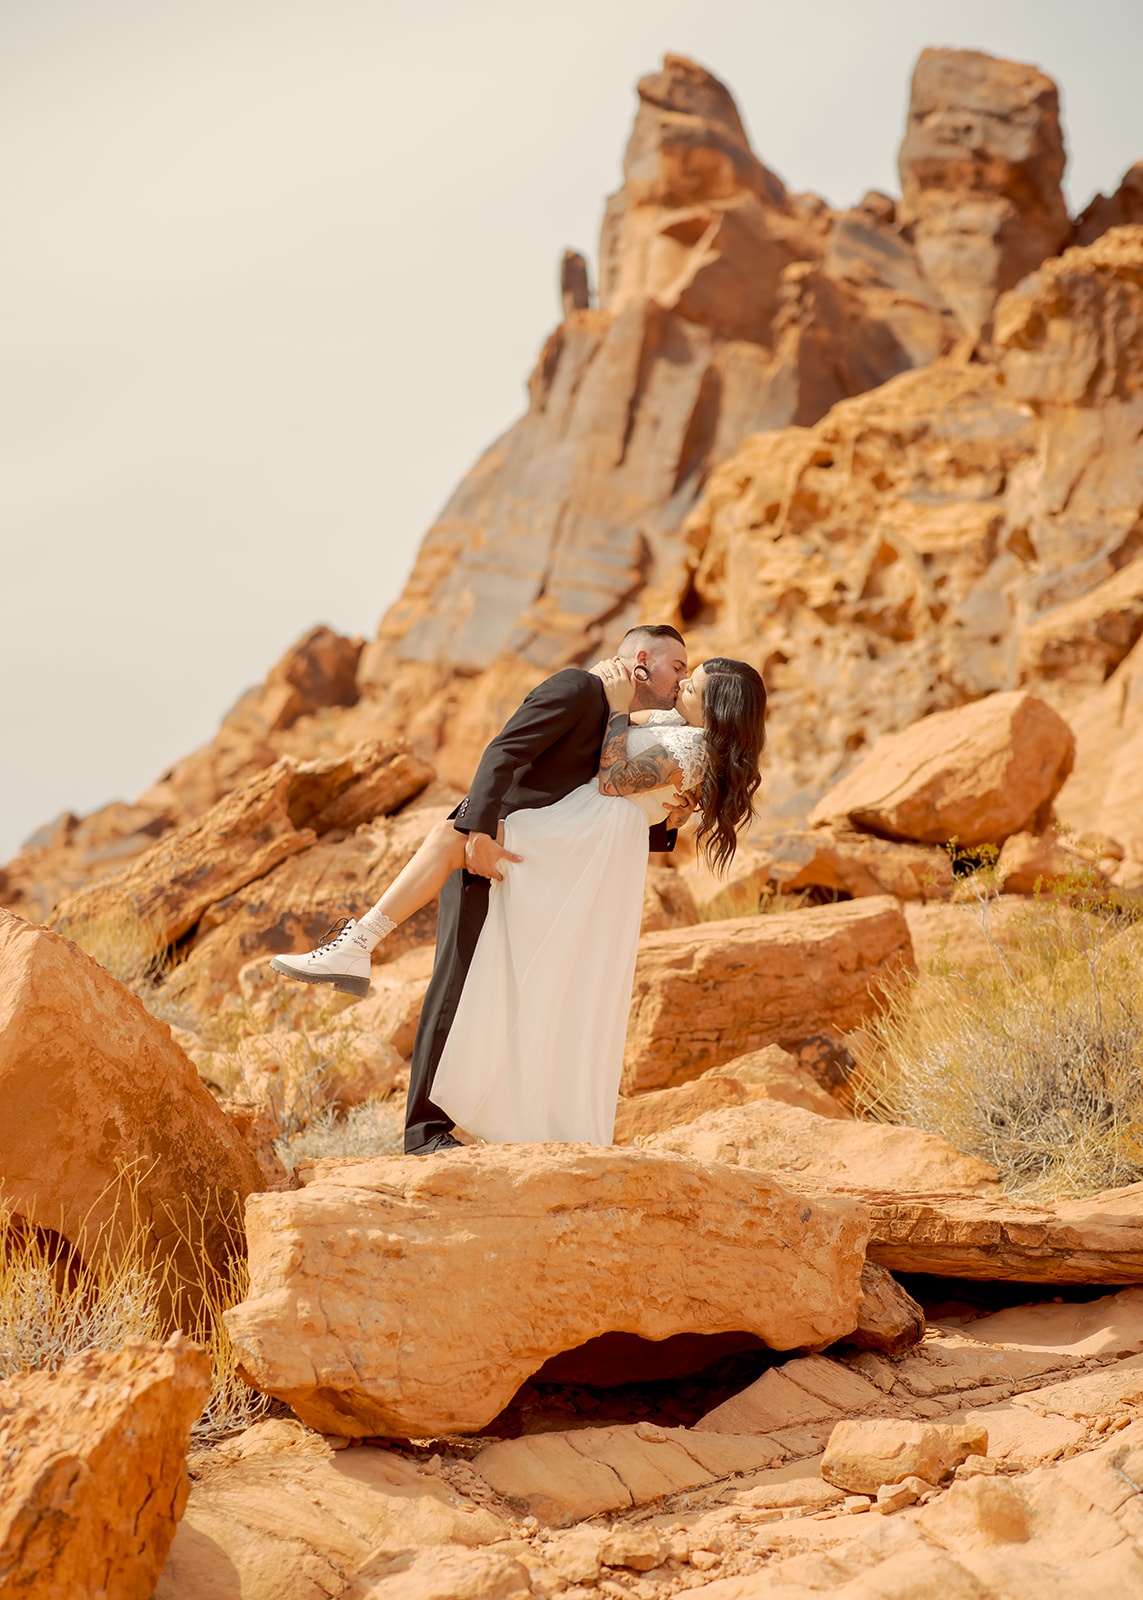 Newlyweds Kissing on Dramatic Red Rocks at Valley of Fire near Las Vegas 